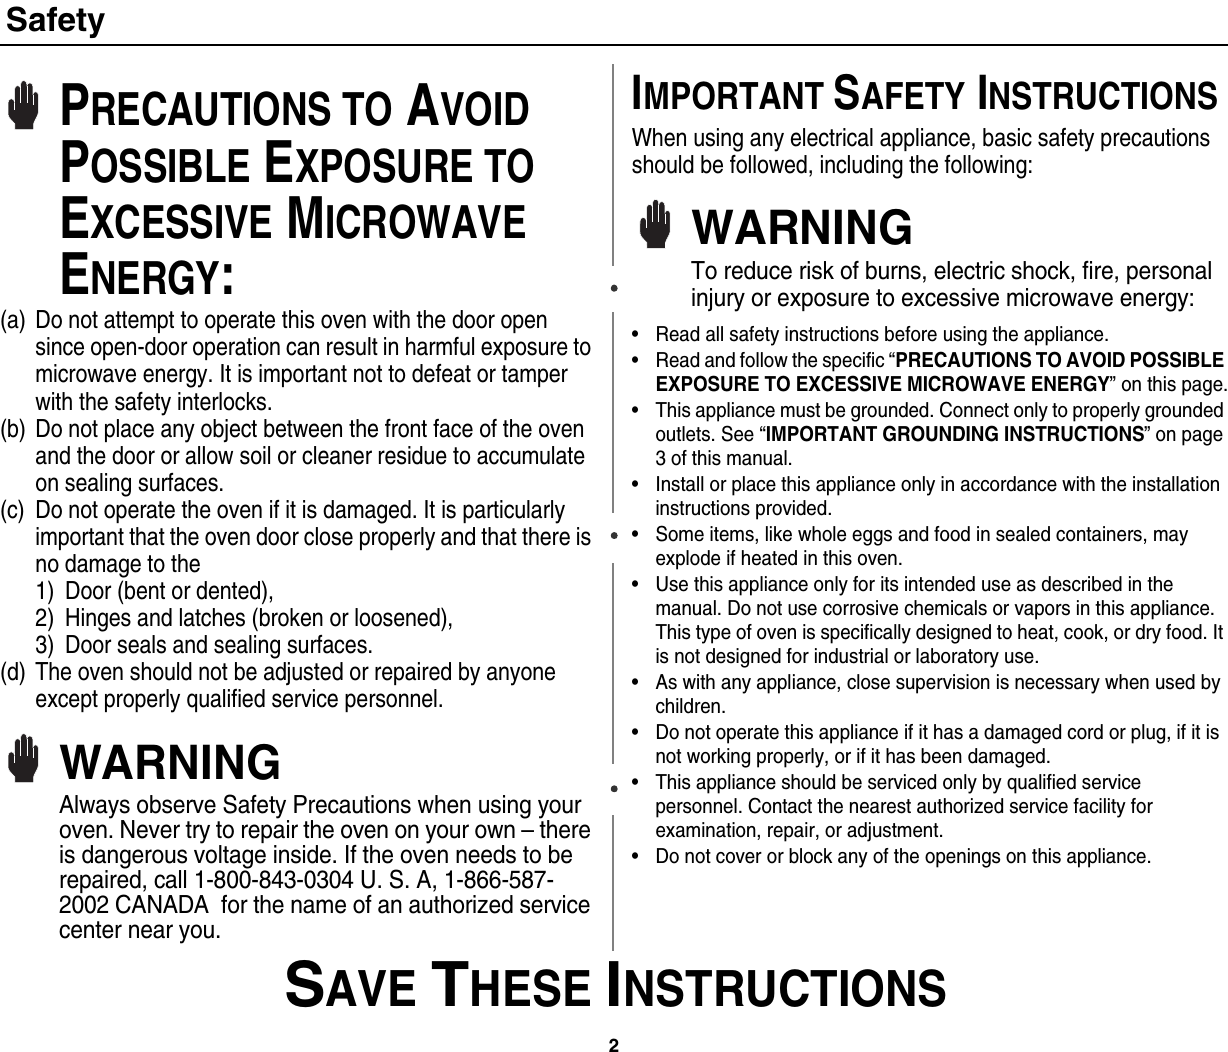 2 SAVE THESE INSTRUCTIONSSafetyPRECAUTIONS TO AVOID POSSIBLE EXPOSURE TO EXCESSIVE MICROWAVE ENERGY:(a) Do not attempt to operate this oven with the door open since open-door operation can result in harmful exposure to microwave energy. It is important not to defeat or tamper with the safety interlocks.(b) Do not place any object between the front face of the oven and the door or allow soil or cleaner residue to accumulate on sealing surfaces.(c) Do not operate the oven if it is damaged. It is particularly important that the oven door close properly and that there is no damage to the 1) Door (bent or dented), 2) Hinges and latches (broken or loosened), 3) Door seals and sealing surfaces.(d) The oven should not be adjusted or repaired by anyone except properly qualified service personnel.WARNINGAlways observe Safety Precautions when using your oven. Never try to repair the oven on your own – there is dangerous voltage inside. If the oven needs to be repaired, call 1-800-843-0304 U. S. A, 1-866-587-2002 CANADA  for the name of an authorized service center near you.IMPORTANT SAFETY INSTRUCTIONSWhen using any electrical appliance, basic safety precautions should be followed, including the following:WARNINGTo reduce risk of burns, electric shock, fire, personal injury or exposure to excessive microwave energy:• Read all safety instructions before using the appliance.• Read and follow the specific “PRECAUTIONS TO AVOID POSSIBLE EXPOSURE TO EXCESSIVE MICROWAVE ENERGY” on this page.• This appliance must be grounded. Connect only to properly grounded outlets. See “IMPORTANT GROUNDING INSTRUCTIONS” on page 3 of this manual. • Install or place this appliance only in accordance with the installation instructions provided.• Some items, like whole eggs and food in sealed containers, may explode if heated in this oven.• Use this appliance only for its intended use as described in the manual. Do not use corrosive chemicals or vapors in this appliance. This type of oven is specifically designed to heat, cook, or dry food. It is not designed for industrial or laboratory use.• As with any appliance, close supervision is necessary when used by children.• Do not operate this appliance if it has a damaged cord or plug, if it is not working properly, or if it has been damaged.• This appliance should be serviced only by qualified service personnel. Contact the nearest authorized service facility for examination, repair, or adjustment.• Do not cover or block any of the openings on this appliance.